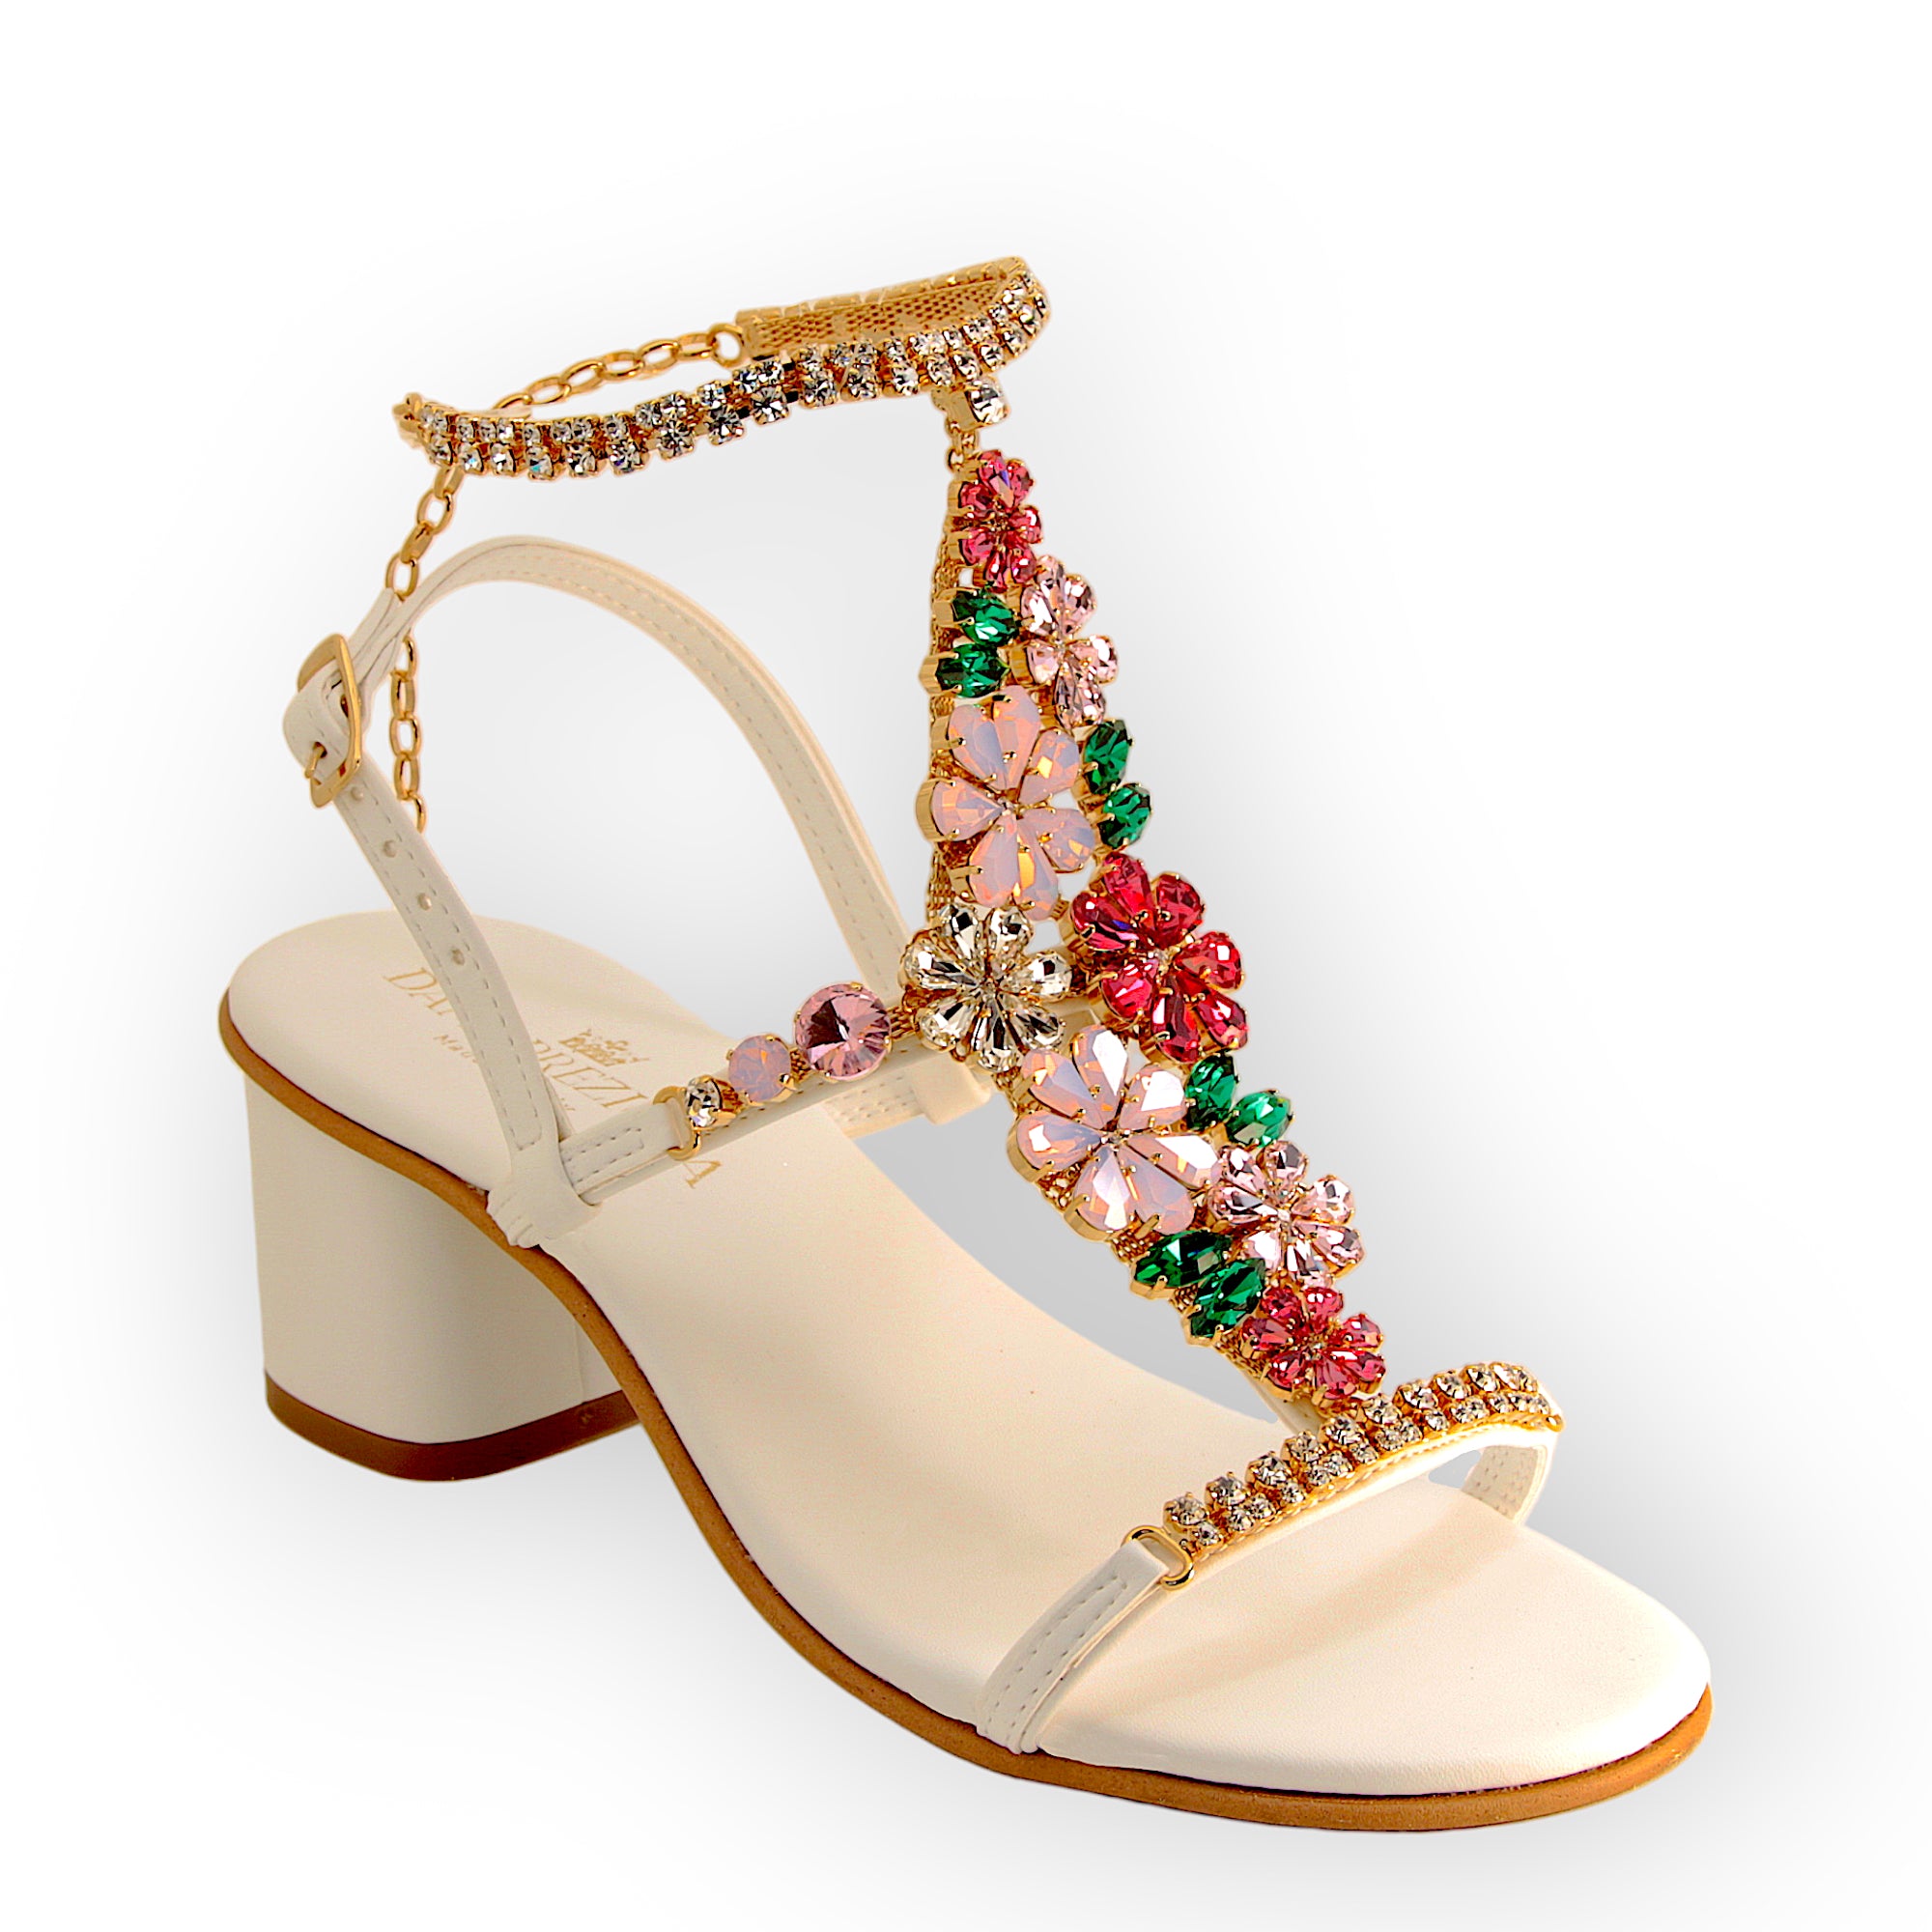 Daisy Bouquet, Jewel Sandal With Crystal Flowers And Block Heel